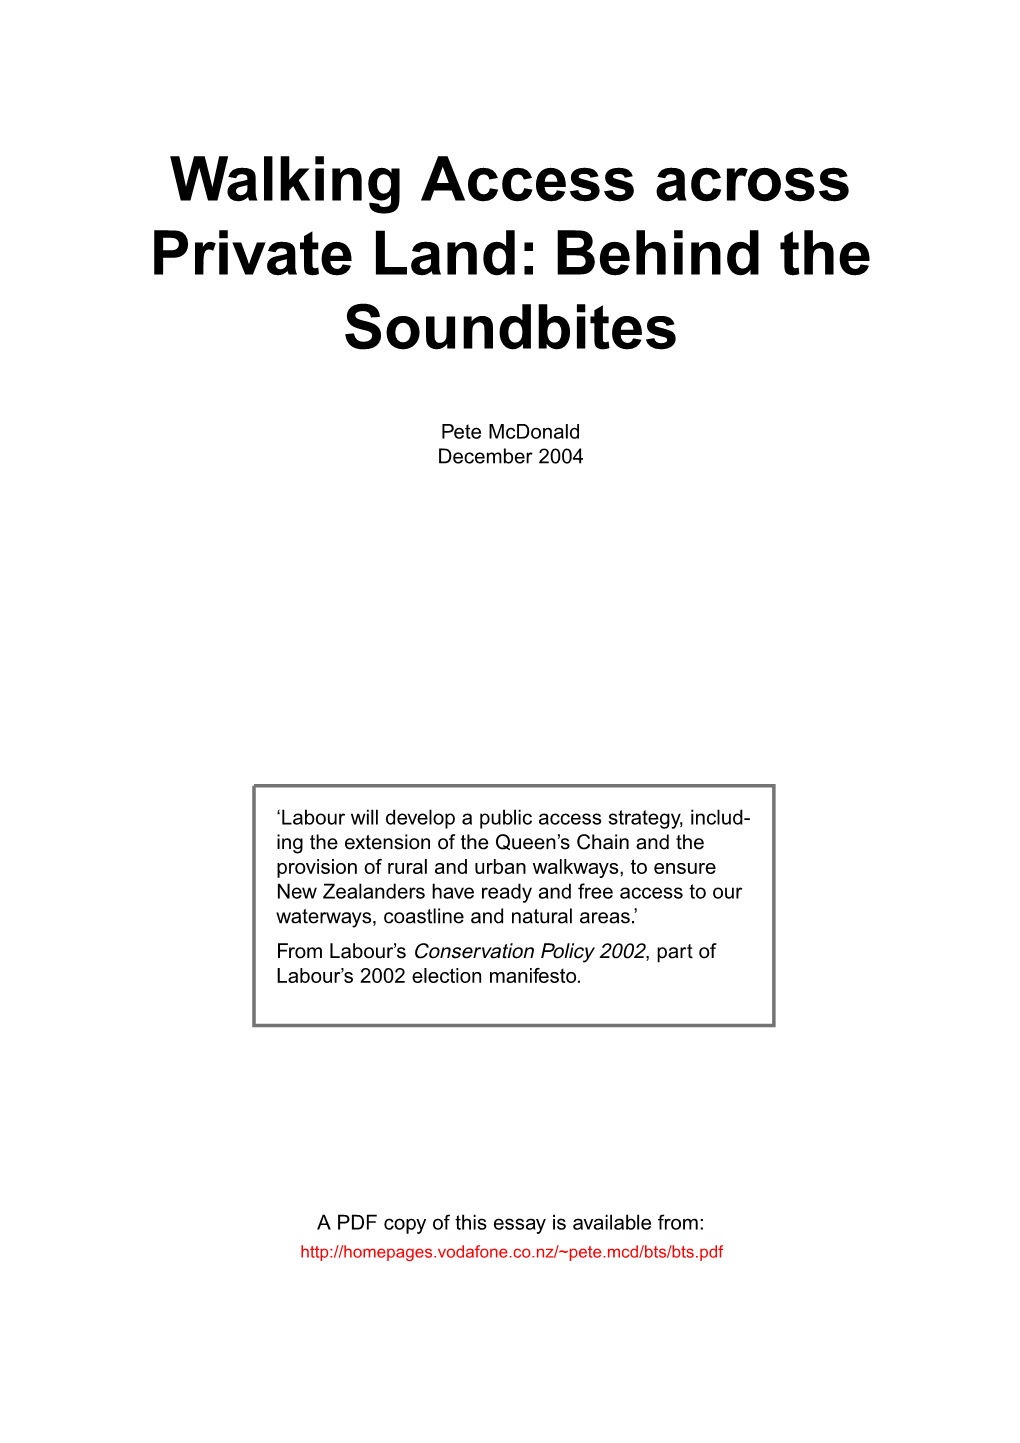 Walking Access Across Private Land: Behind the Soundbites